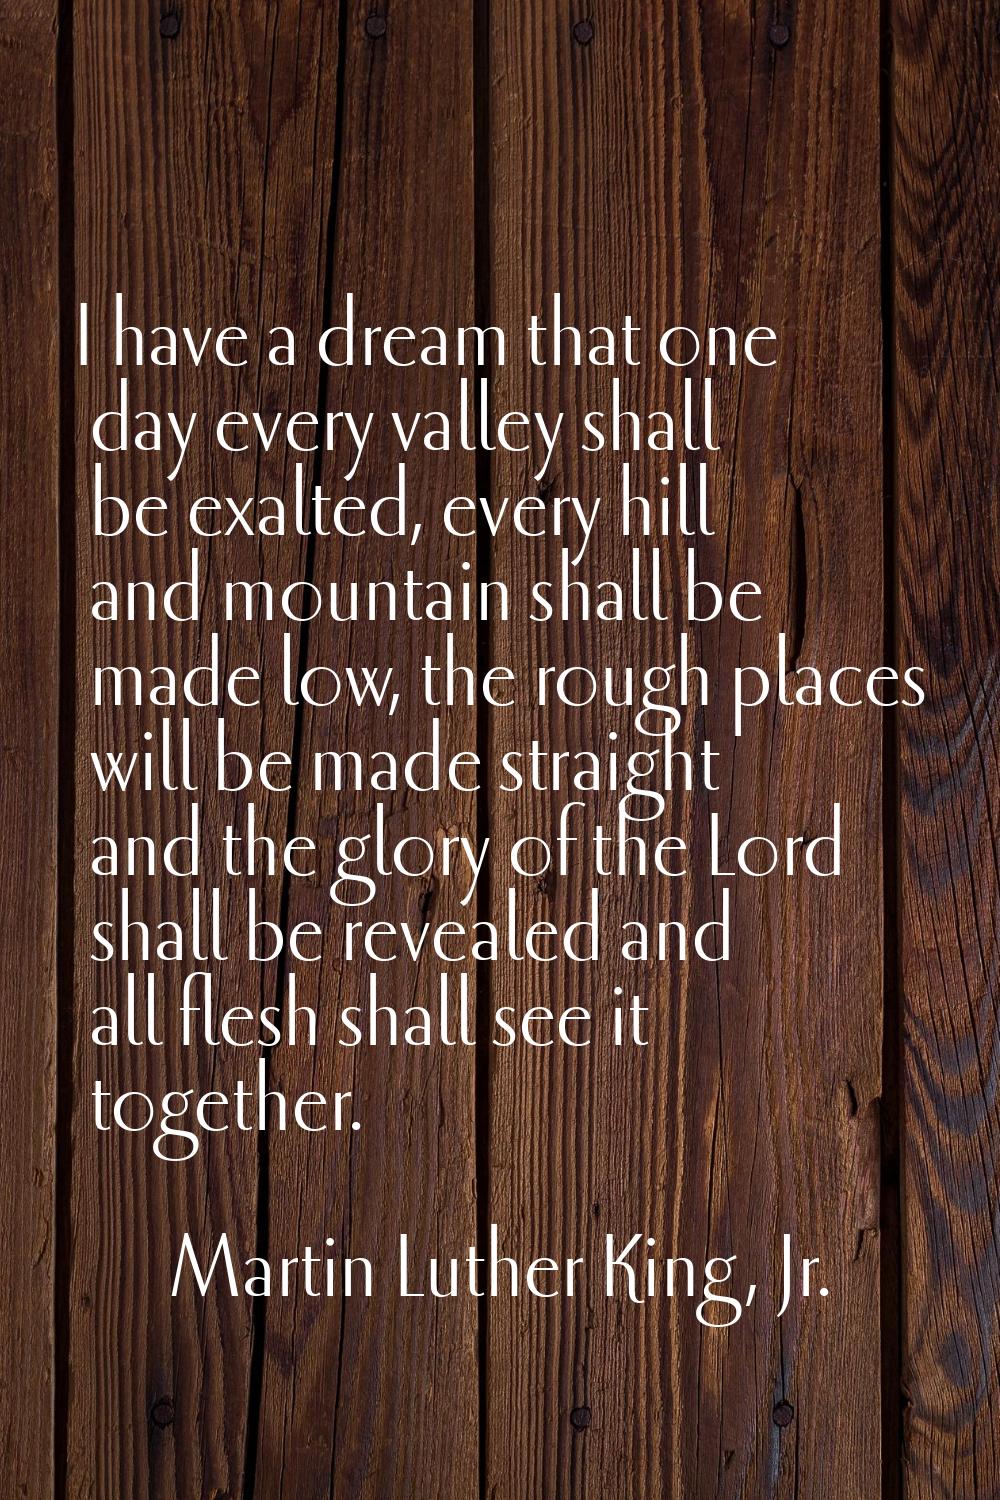 I have a dream that one day every valley shall be exalted, every hill and mountain shall be made lo